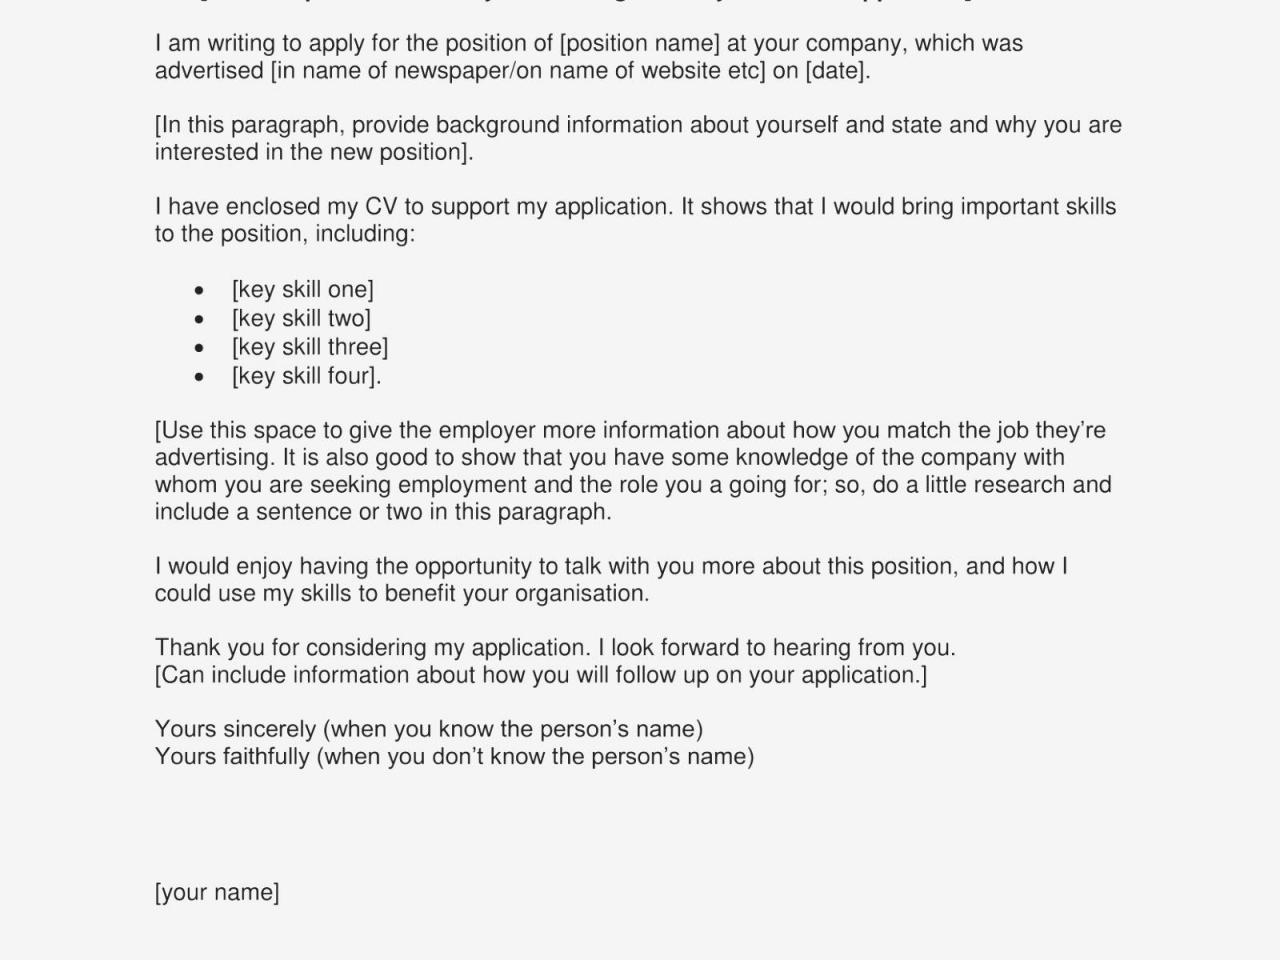 How to write an application letter for a new job